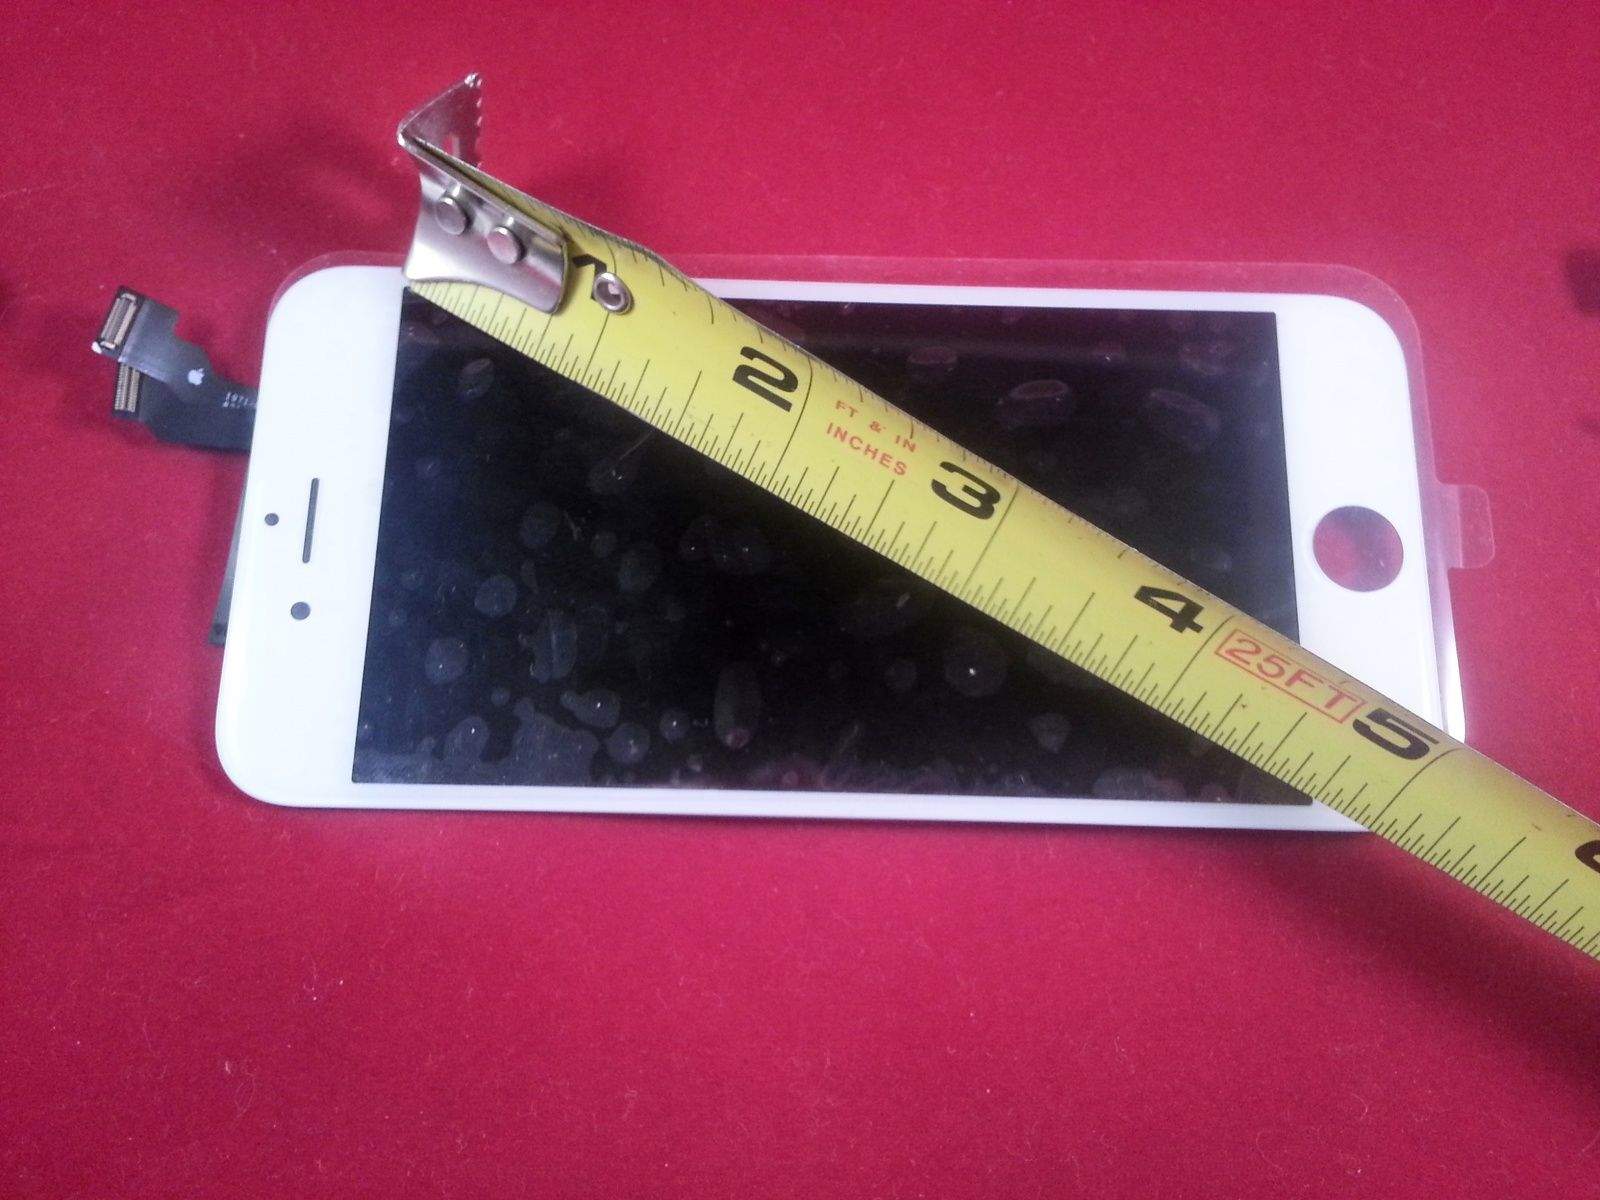 This iPhone 6 screen measures 4.7 inches diagonally, the widely rumored size of the 